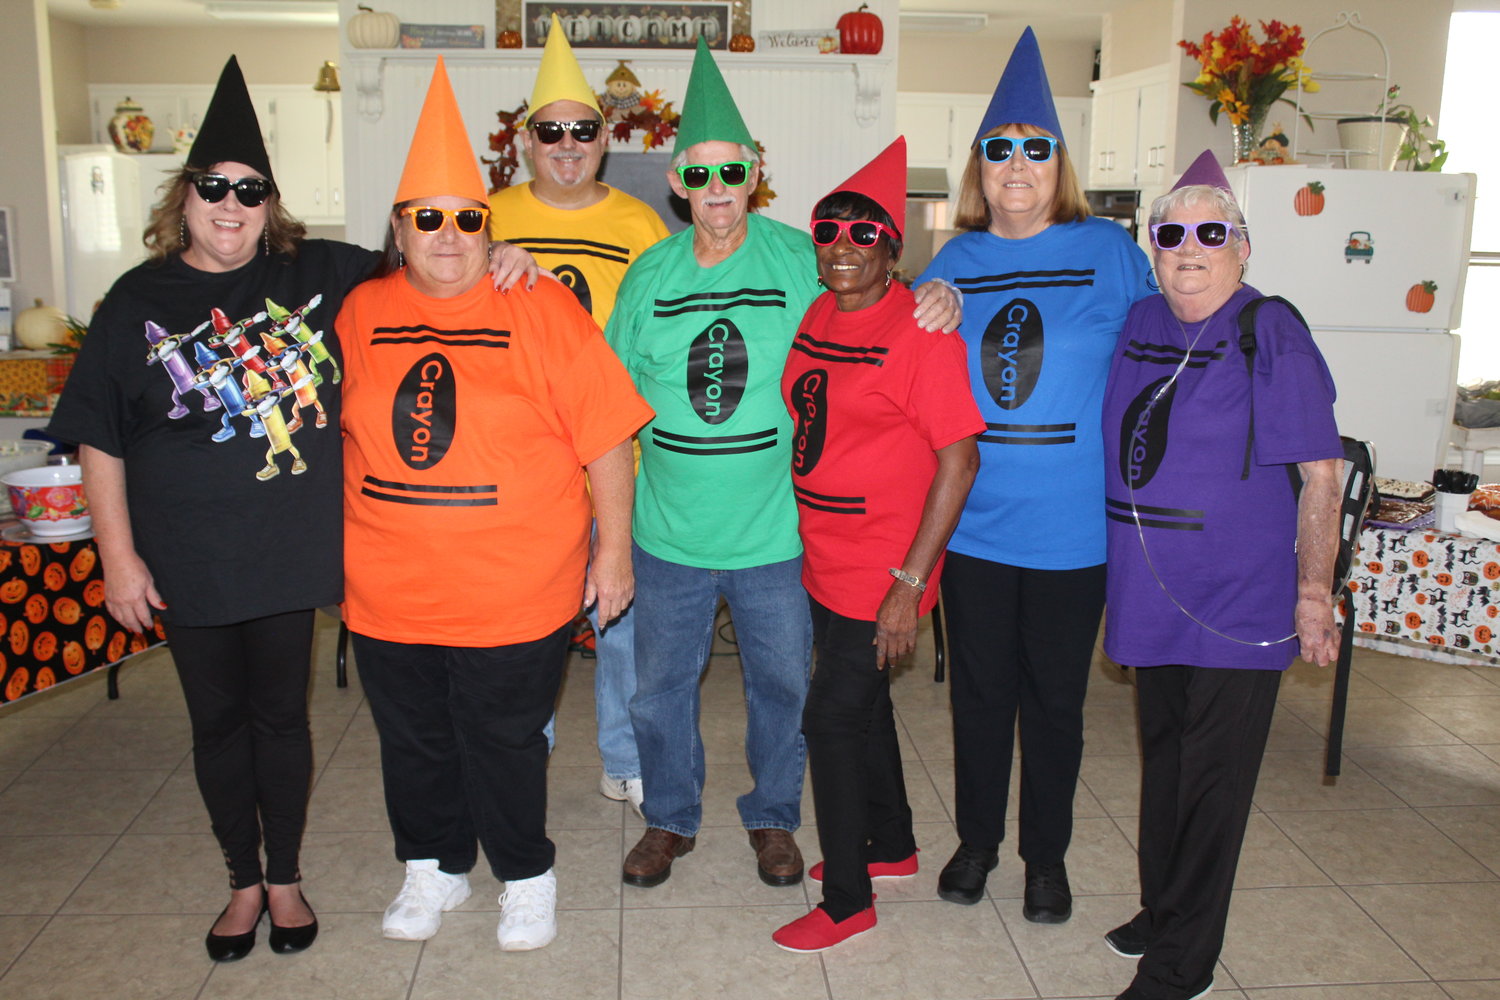 Robertsdale senior staff and volunteers dressed as crayons, from left, senior activities director Amy Ochello, volunteer coordinator Mary Williams, Lee Day, Alvin Nabors, Georgia Rudolph, Mary Nabors and Kathy Peterson.